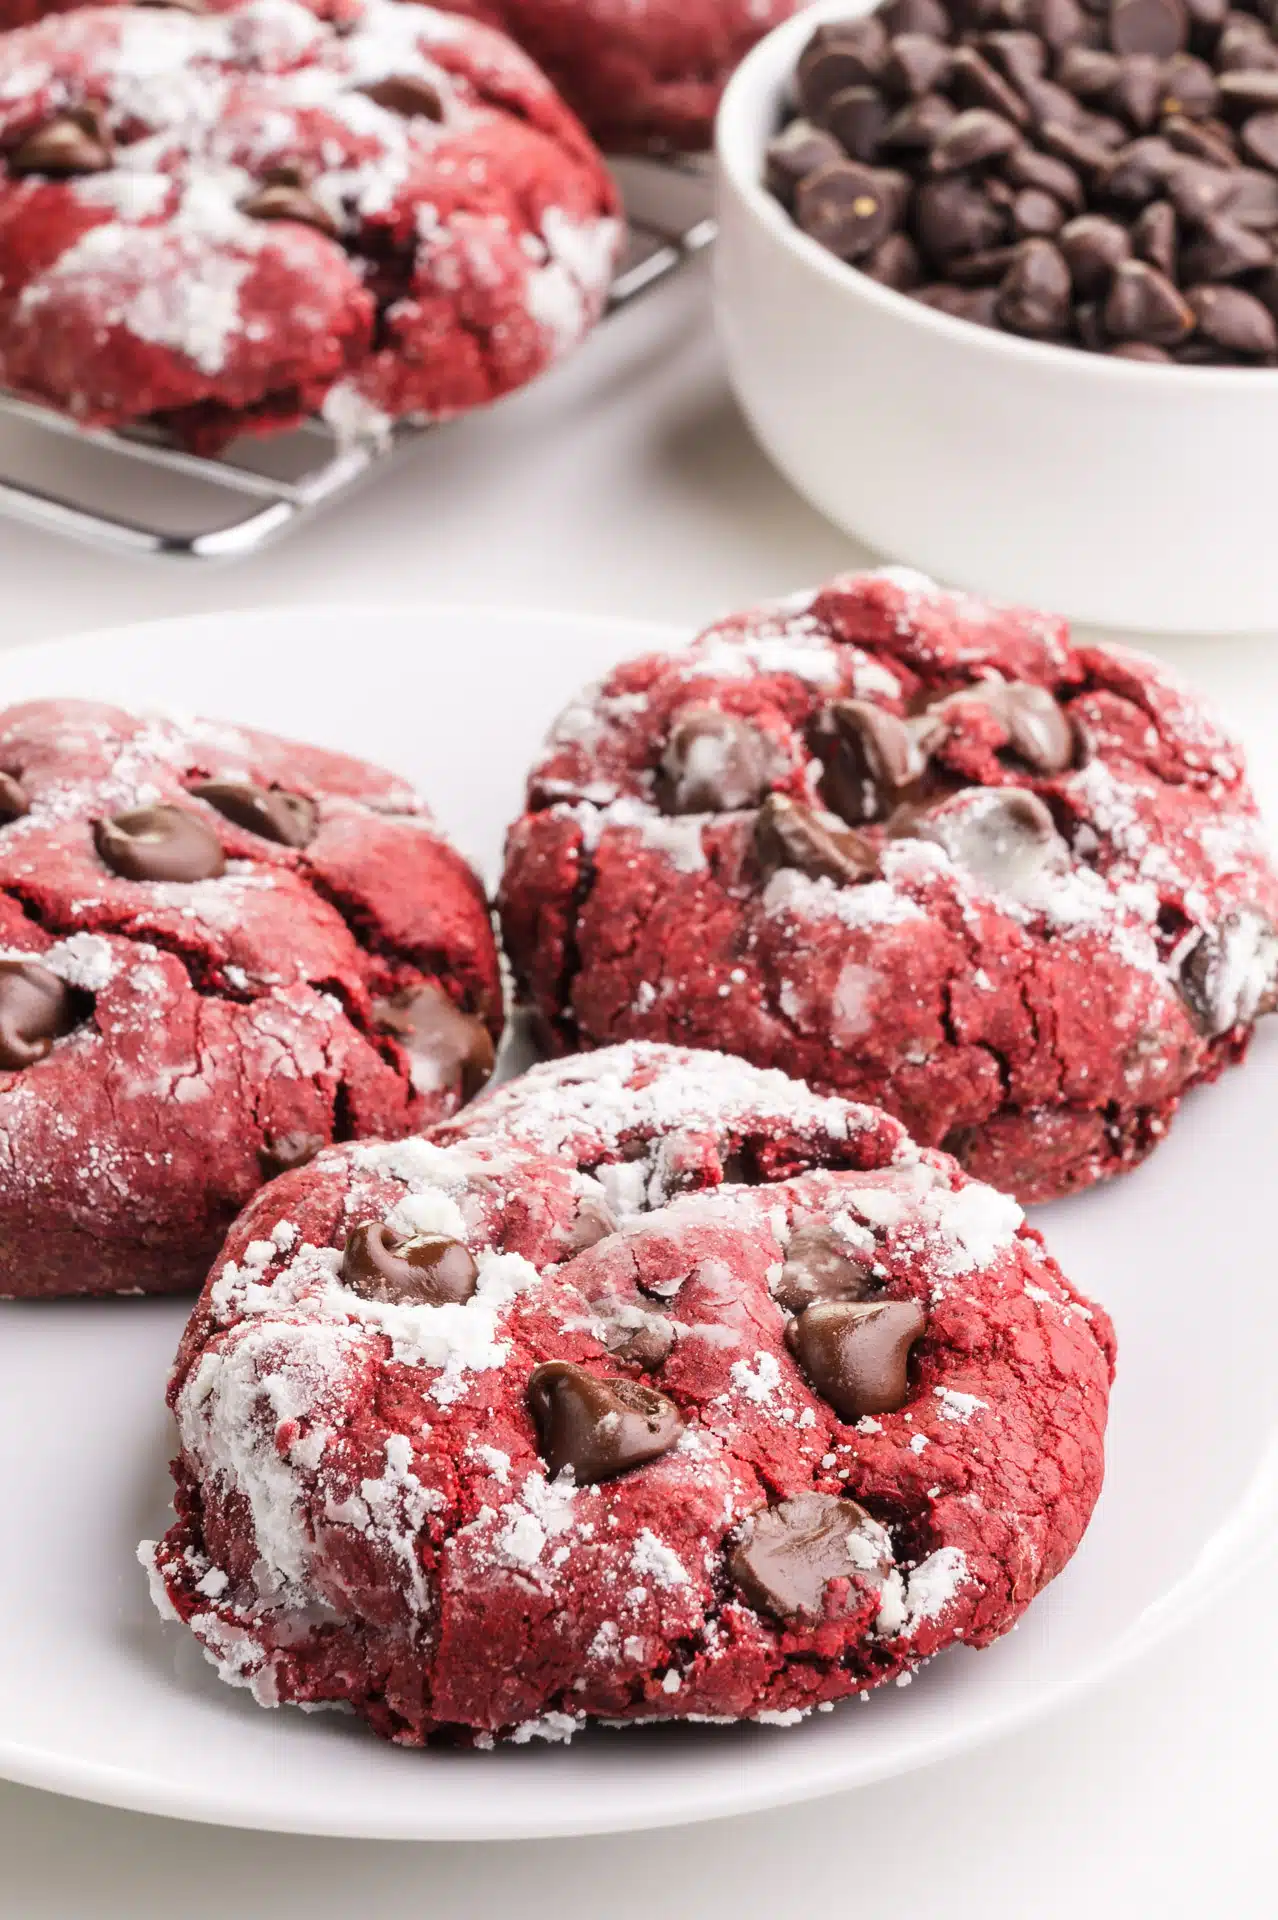 Red velvet chocolate chip cookies are on a plate. There's a bowl of chocolate chips and more cookies in the background.